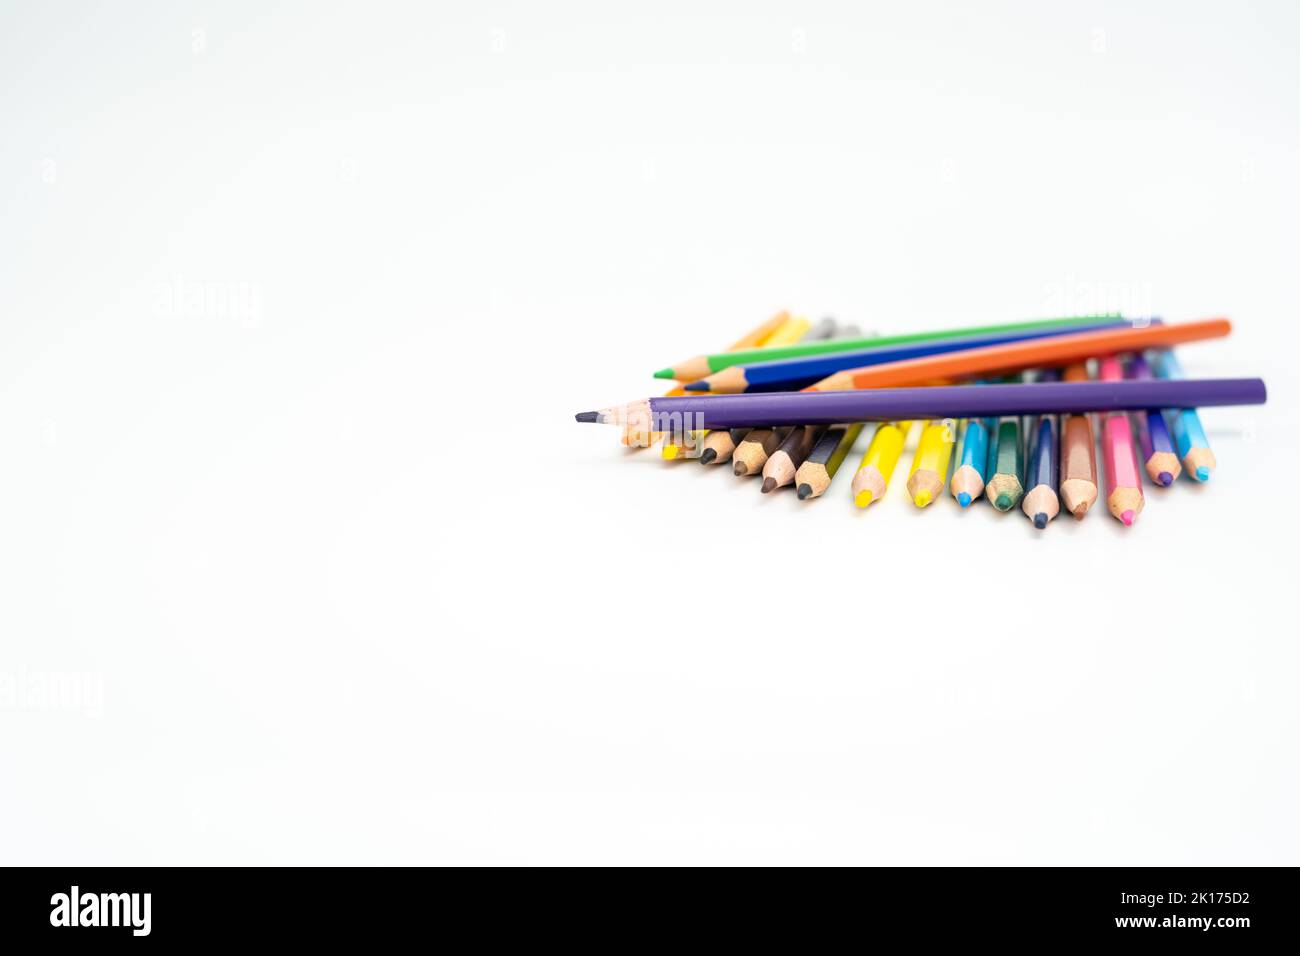 wooden colored pencils on a white background with a point (lead) in focus Stock Photo